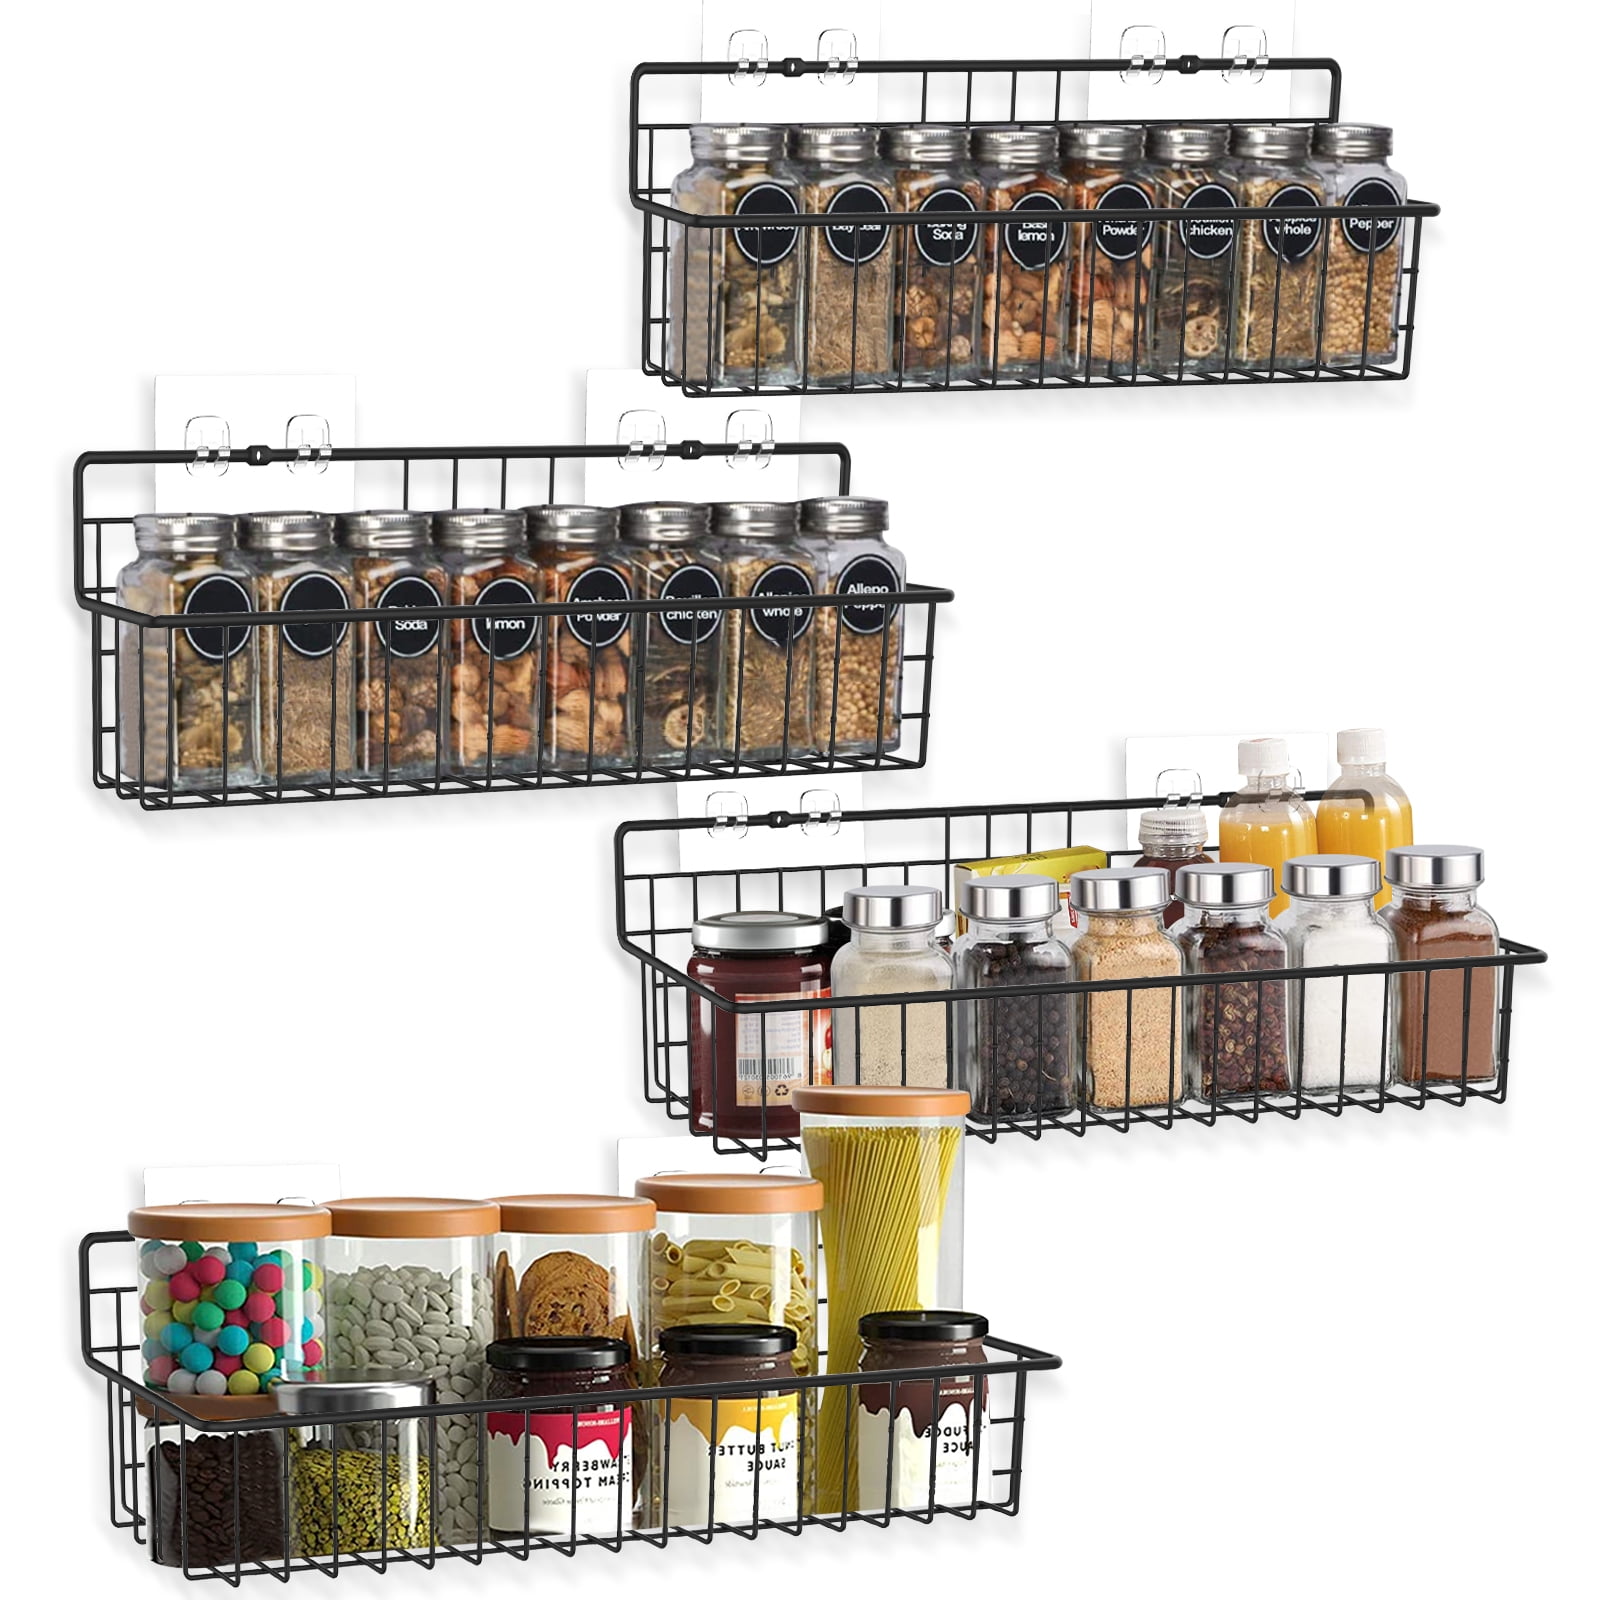 Nandae Wall Mount Spice Racks Spice Rack for Cuboard,Metal Oranizer for Kitchen Cabinets Brown Set of 4